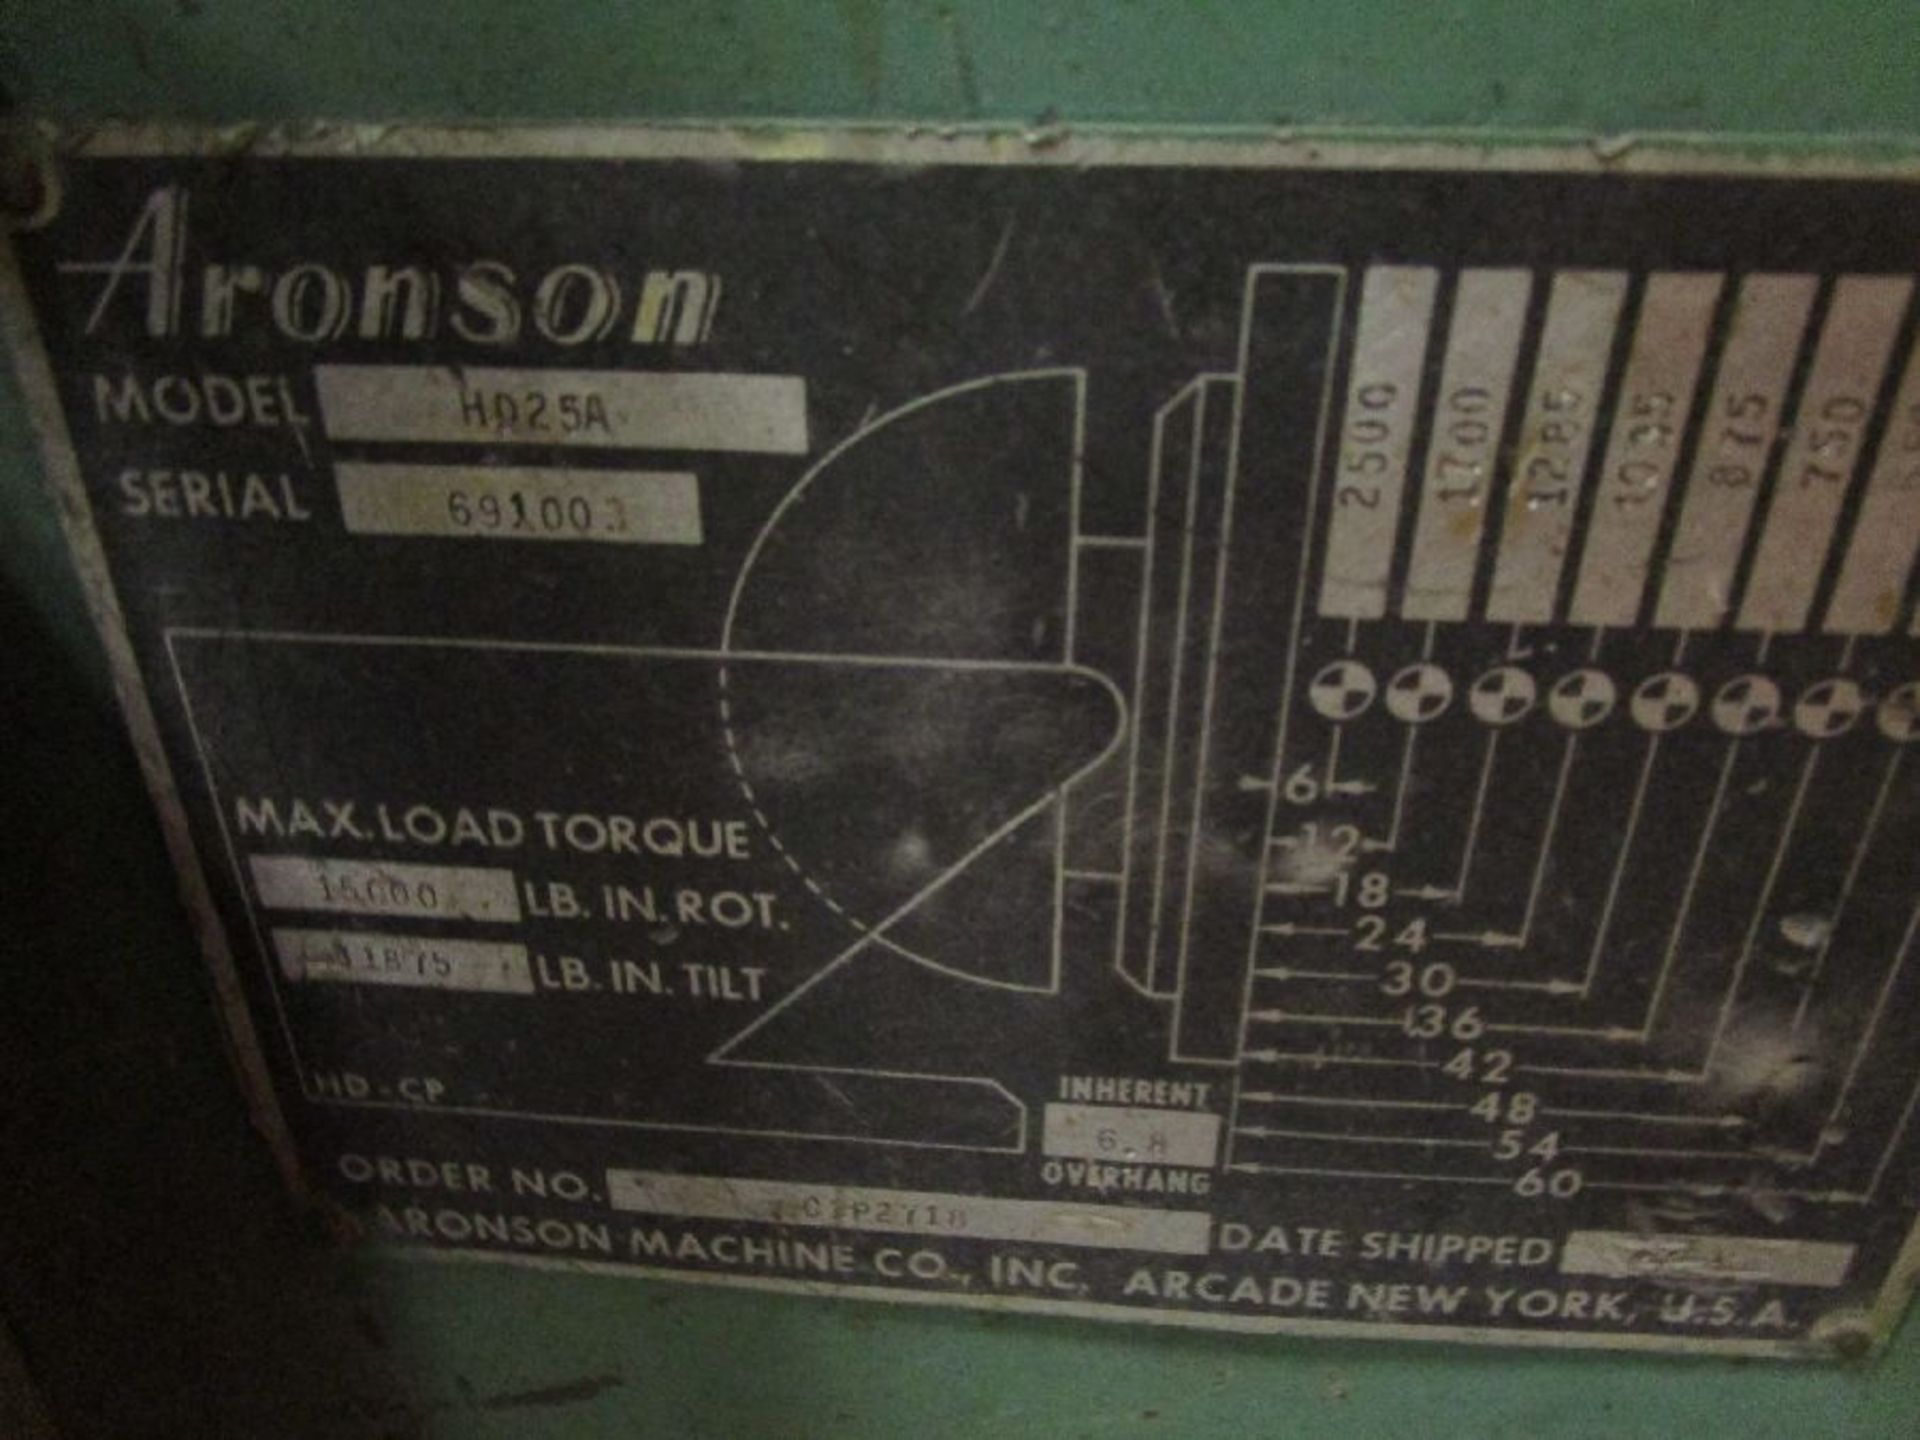 Aronson Model HD25A 2- Axis Welding Positioner - Image 4 of 4